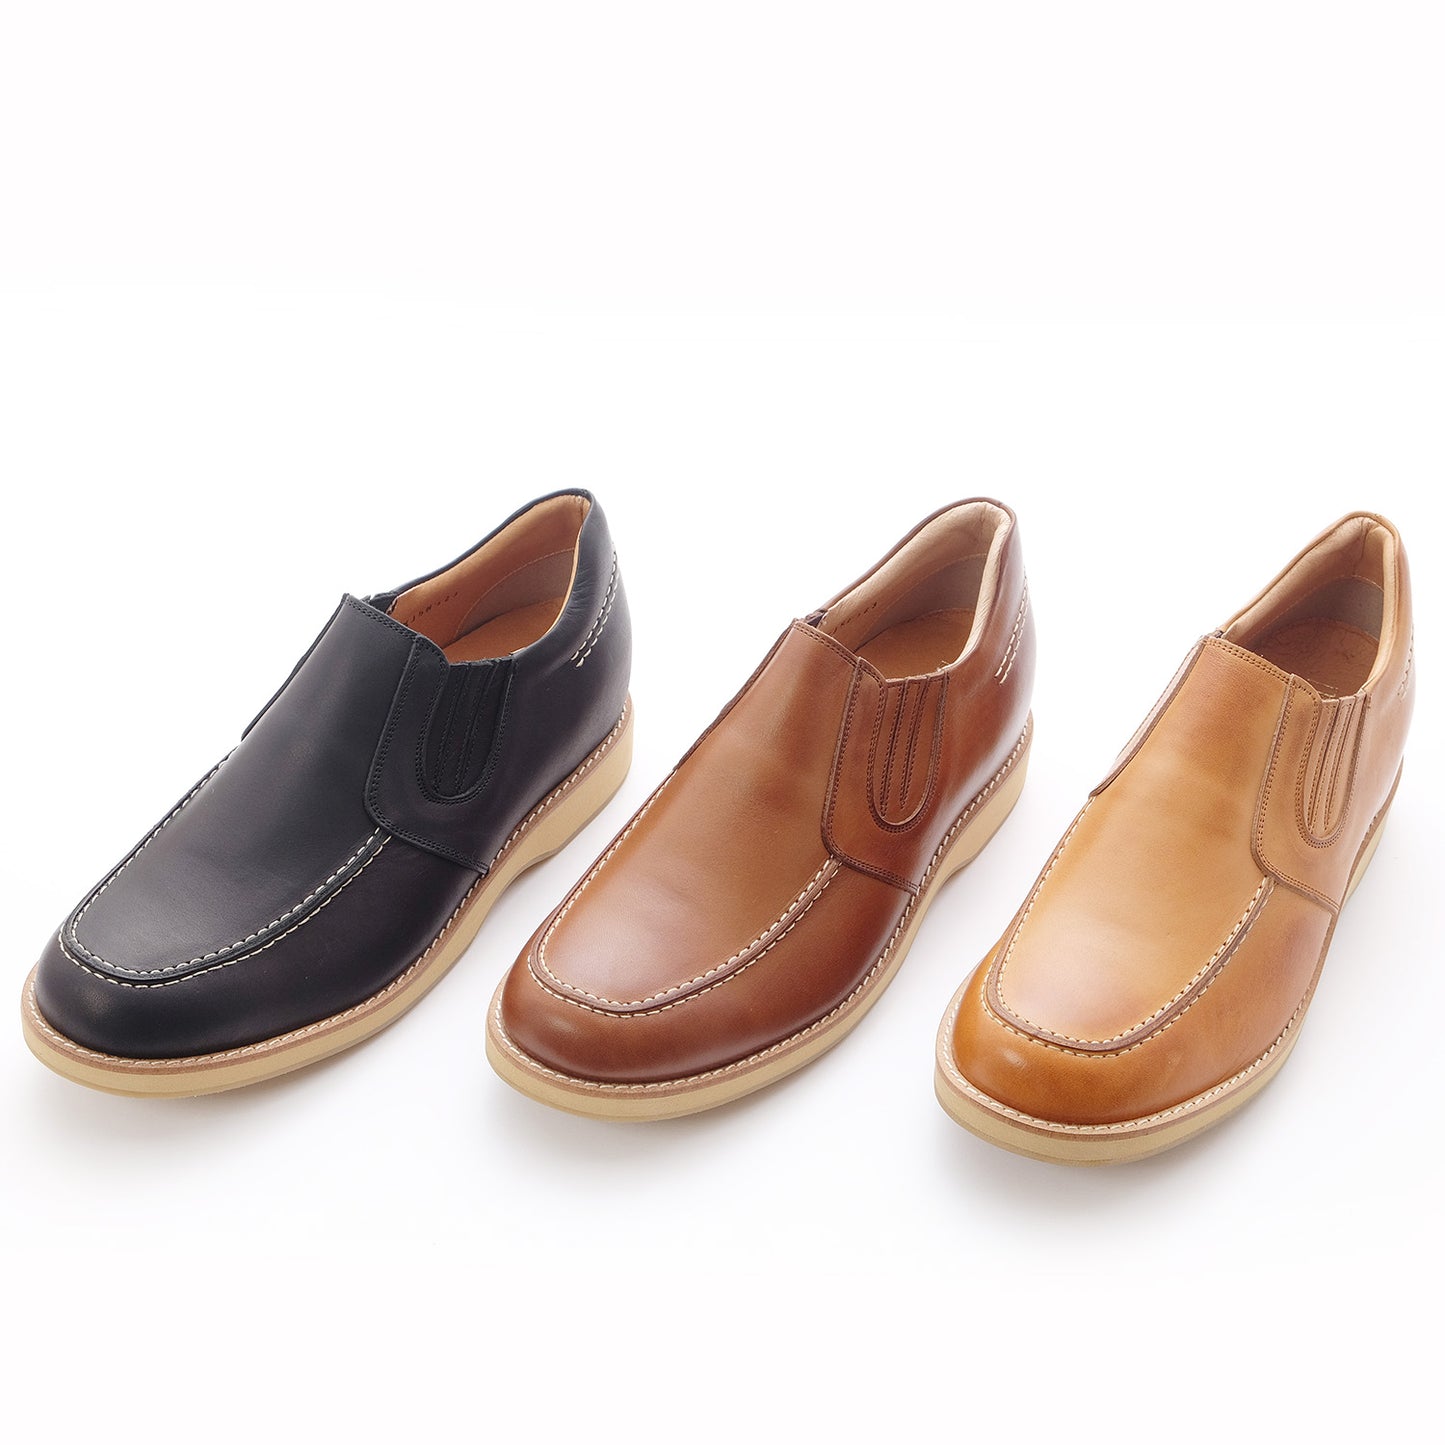 Men's Elevator Shoes Height Increasing 2.2" Taller Slip-on Side Gore Loafer Genuine Leather No. 523